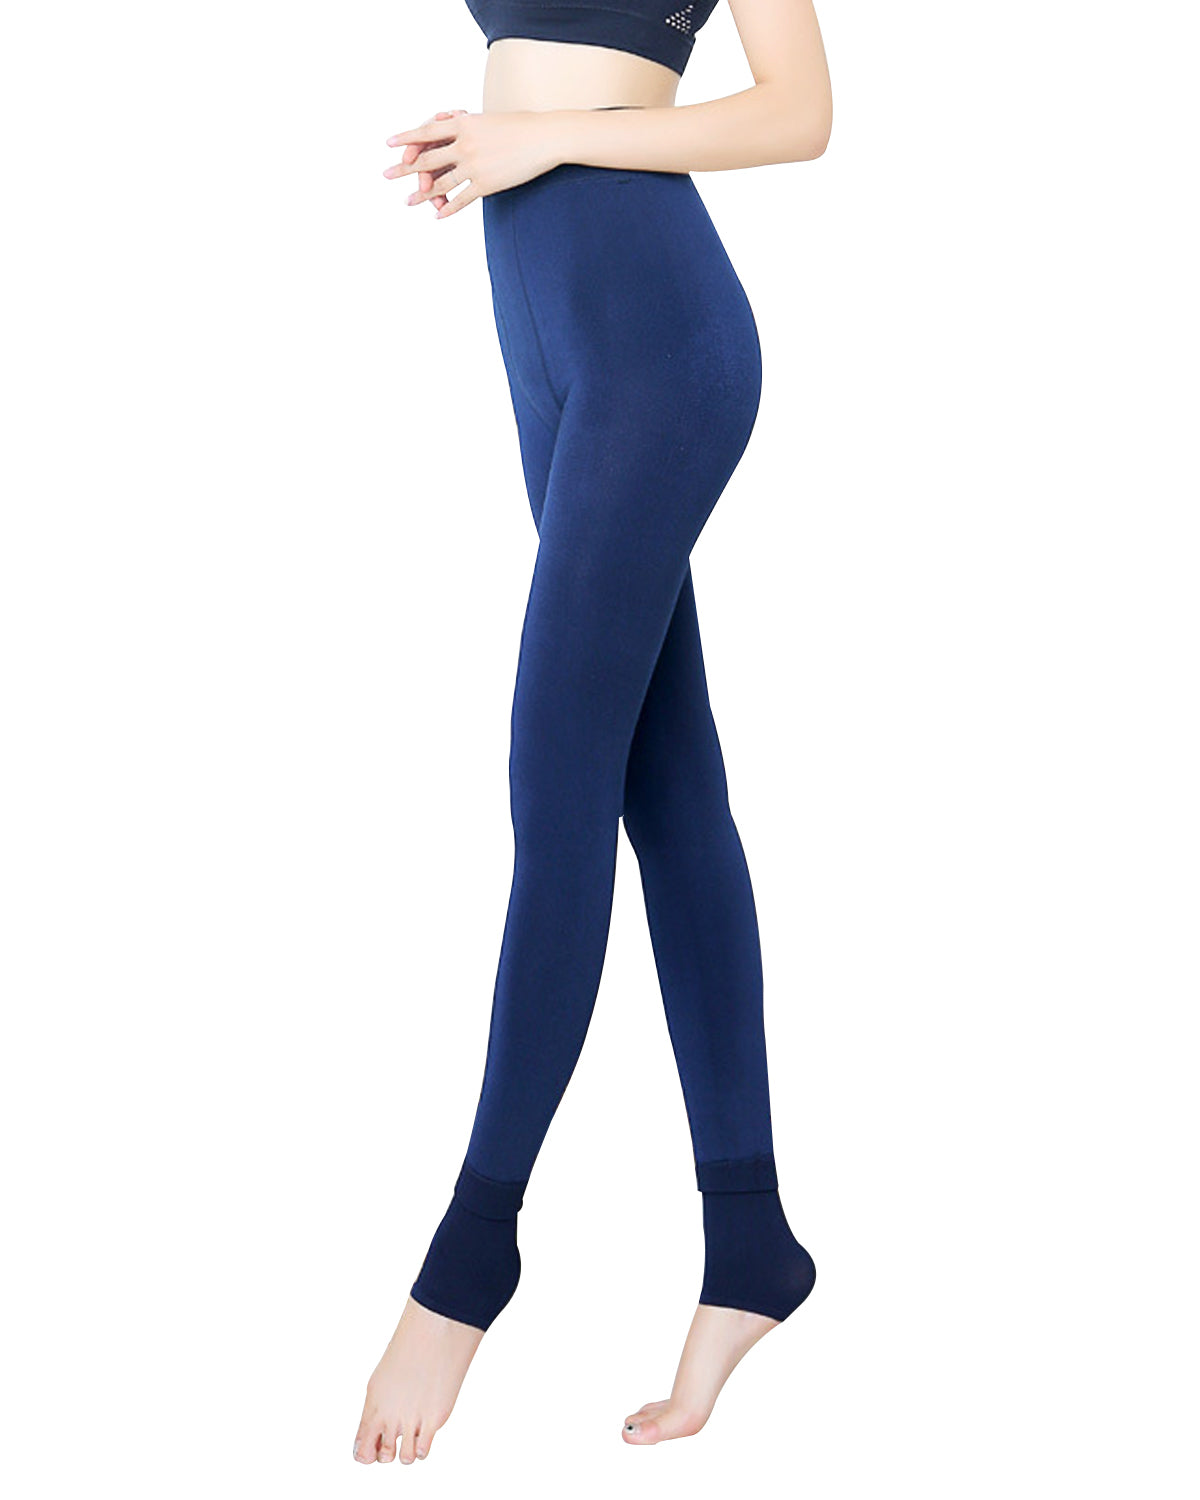 WrapablesÂ® Women's High Waisted Medium-Thick Fleece Lined Tights Leggings